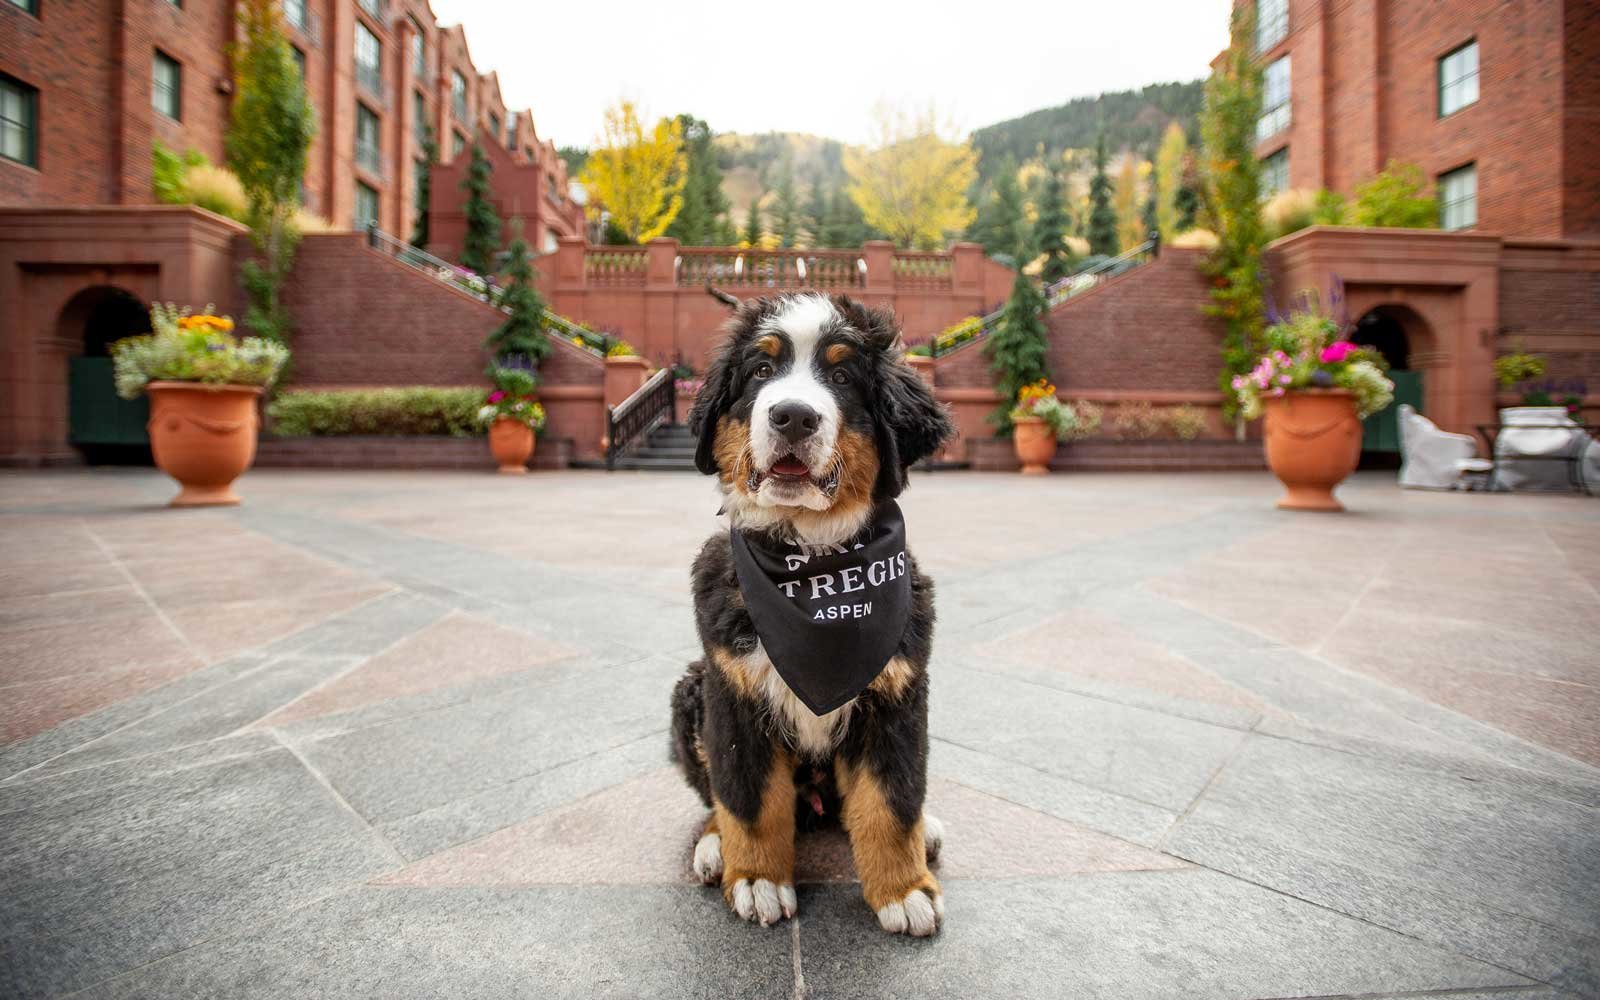 Be the Fur Butler at the St. Regis Aspen and take care of Kitty!